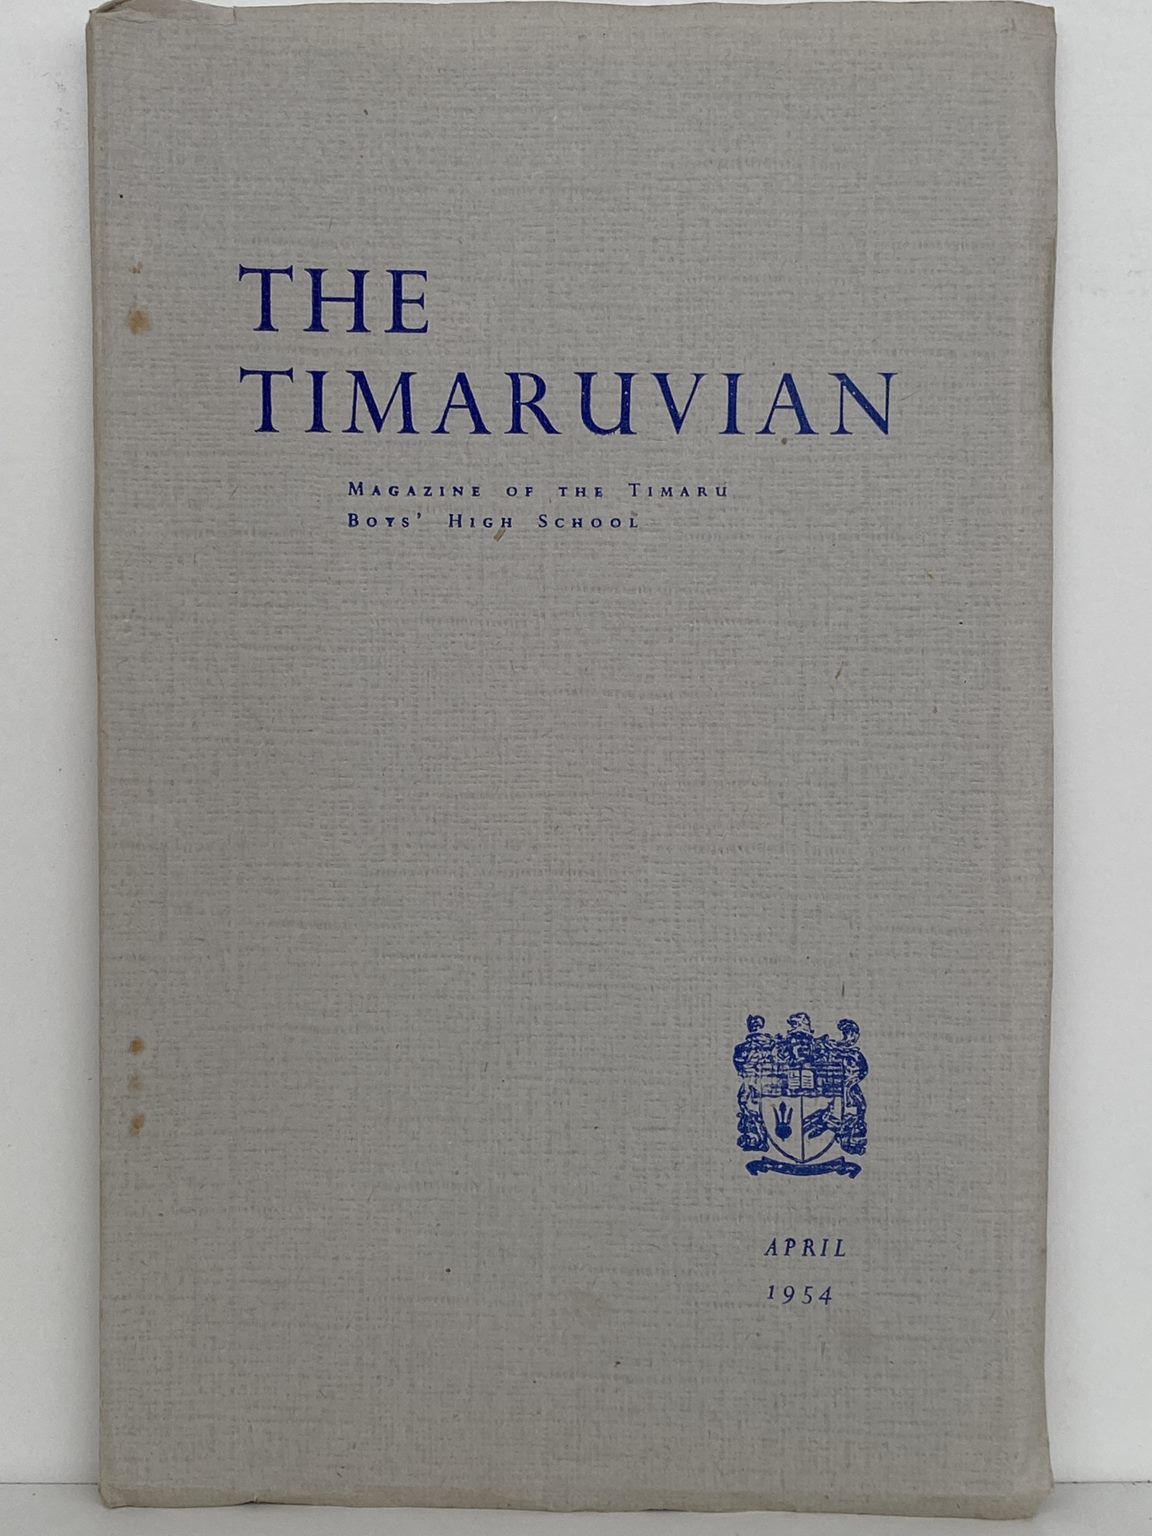 THE TIMARUVIAN: Magazine of the Timaru Boys' High School and its Old Boys' Association 1954